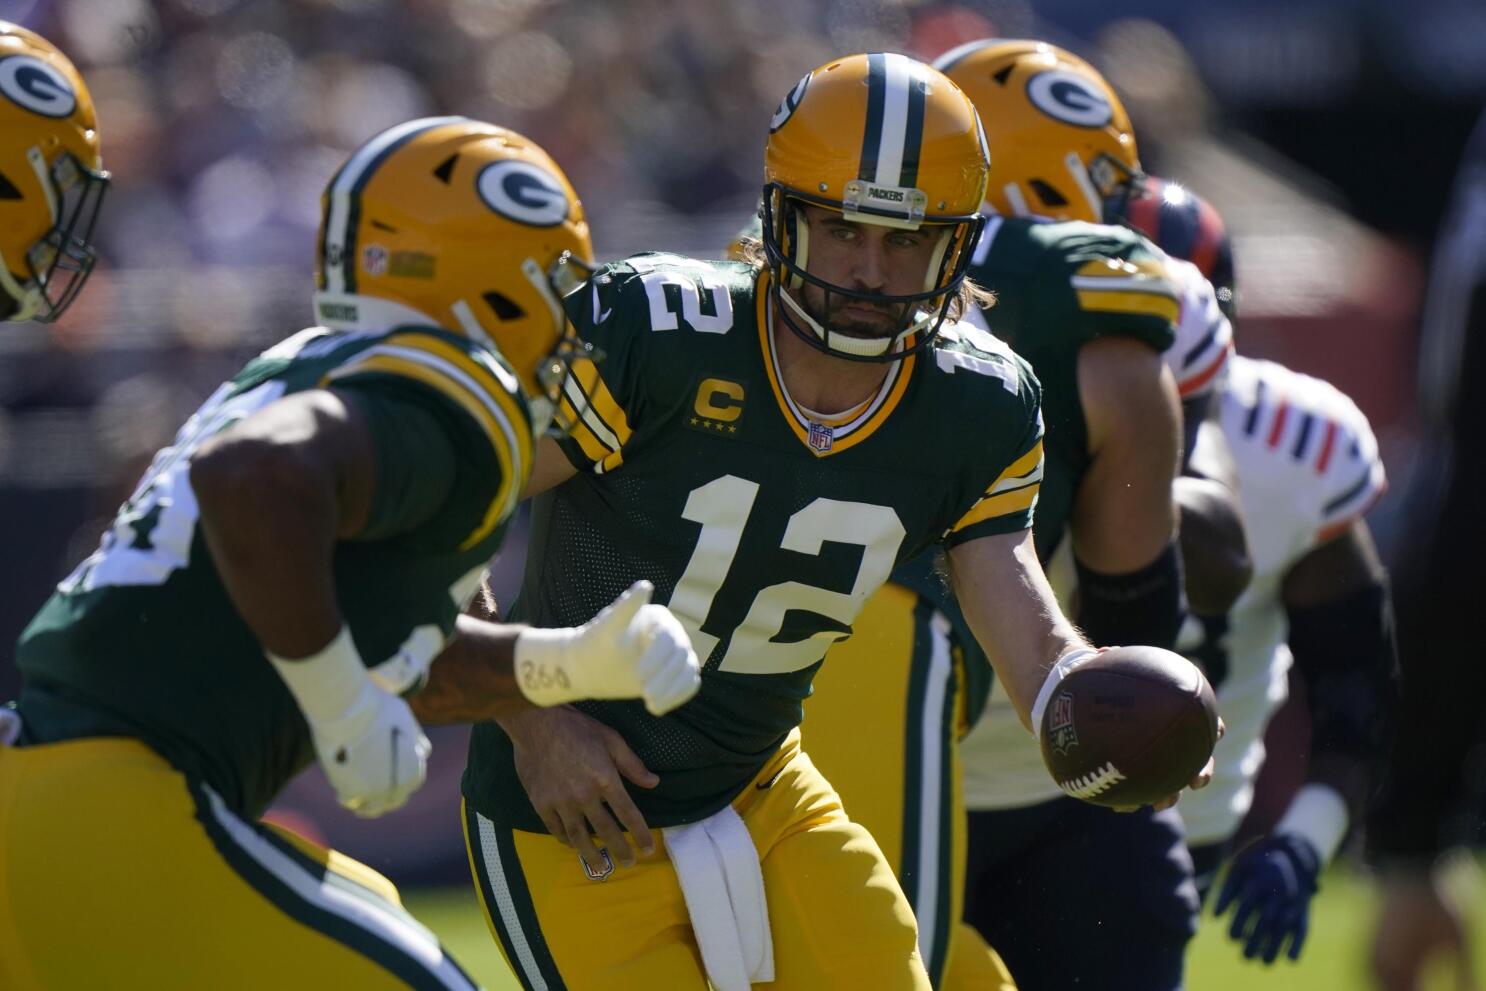 Rodgers Throws 4 TD Passes, Packers Defeat Bears 45-30